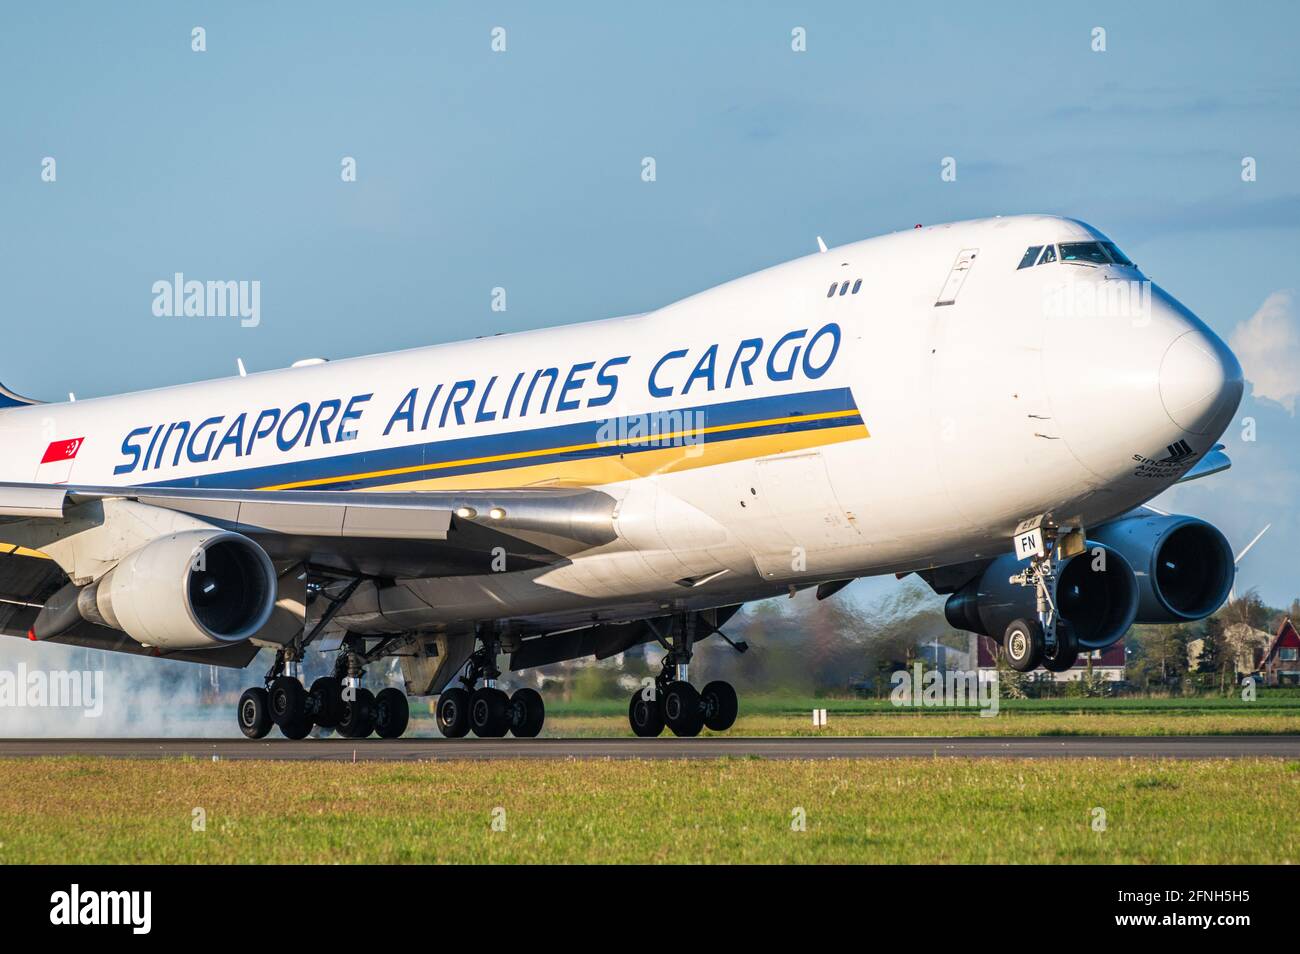 Singapore airlines Cargo Boeing 747 during landing phase Stock Photo